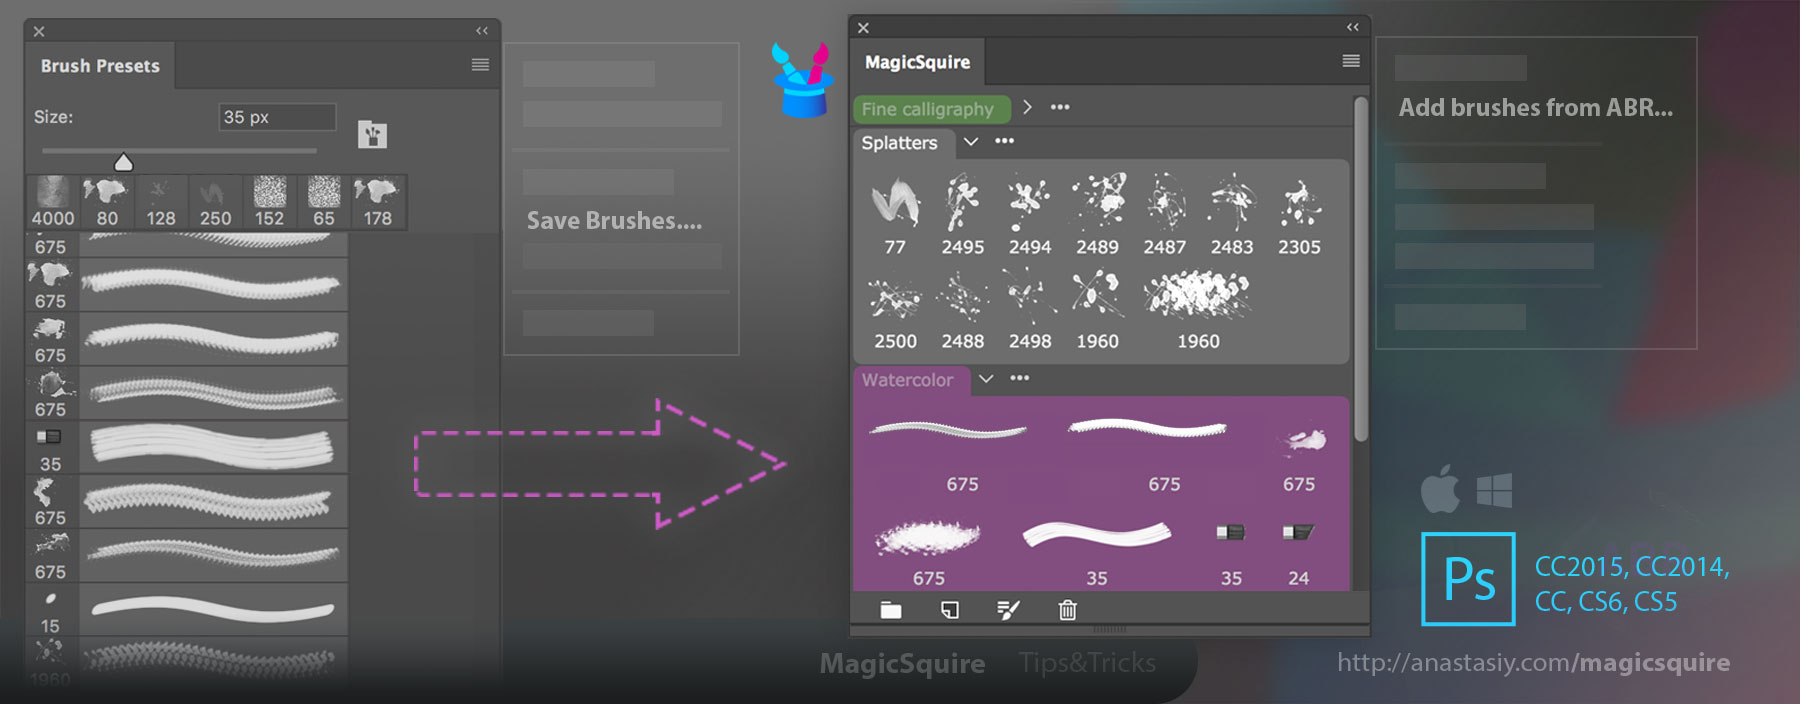 Move brushes from Brush Presets into MagicSquire groups in Photoshop